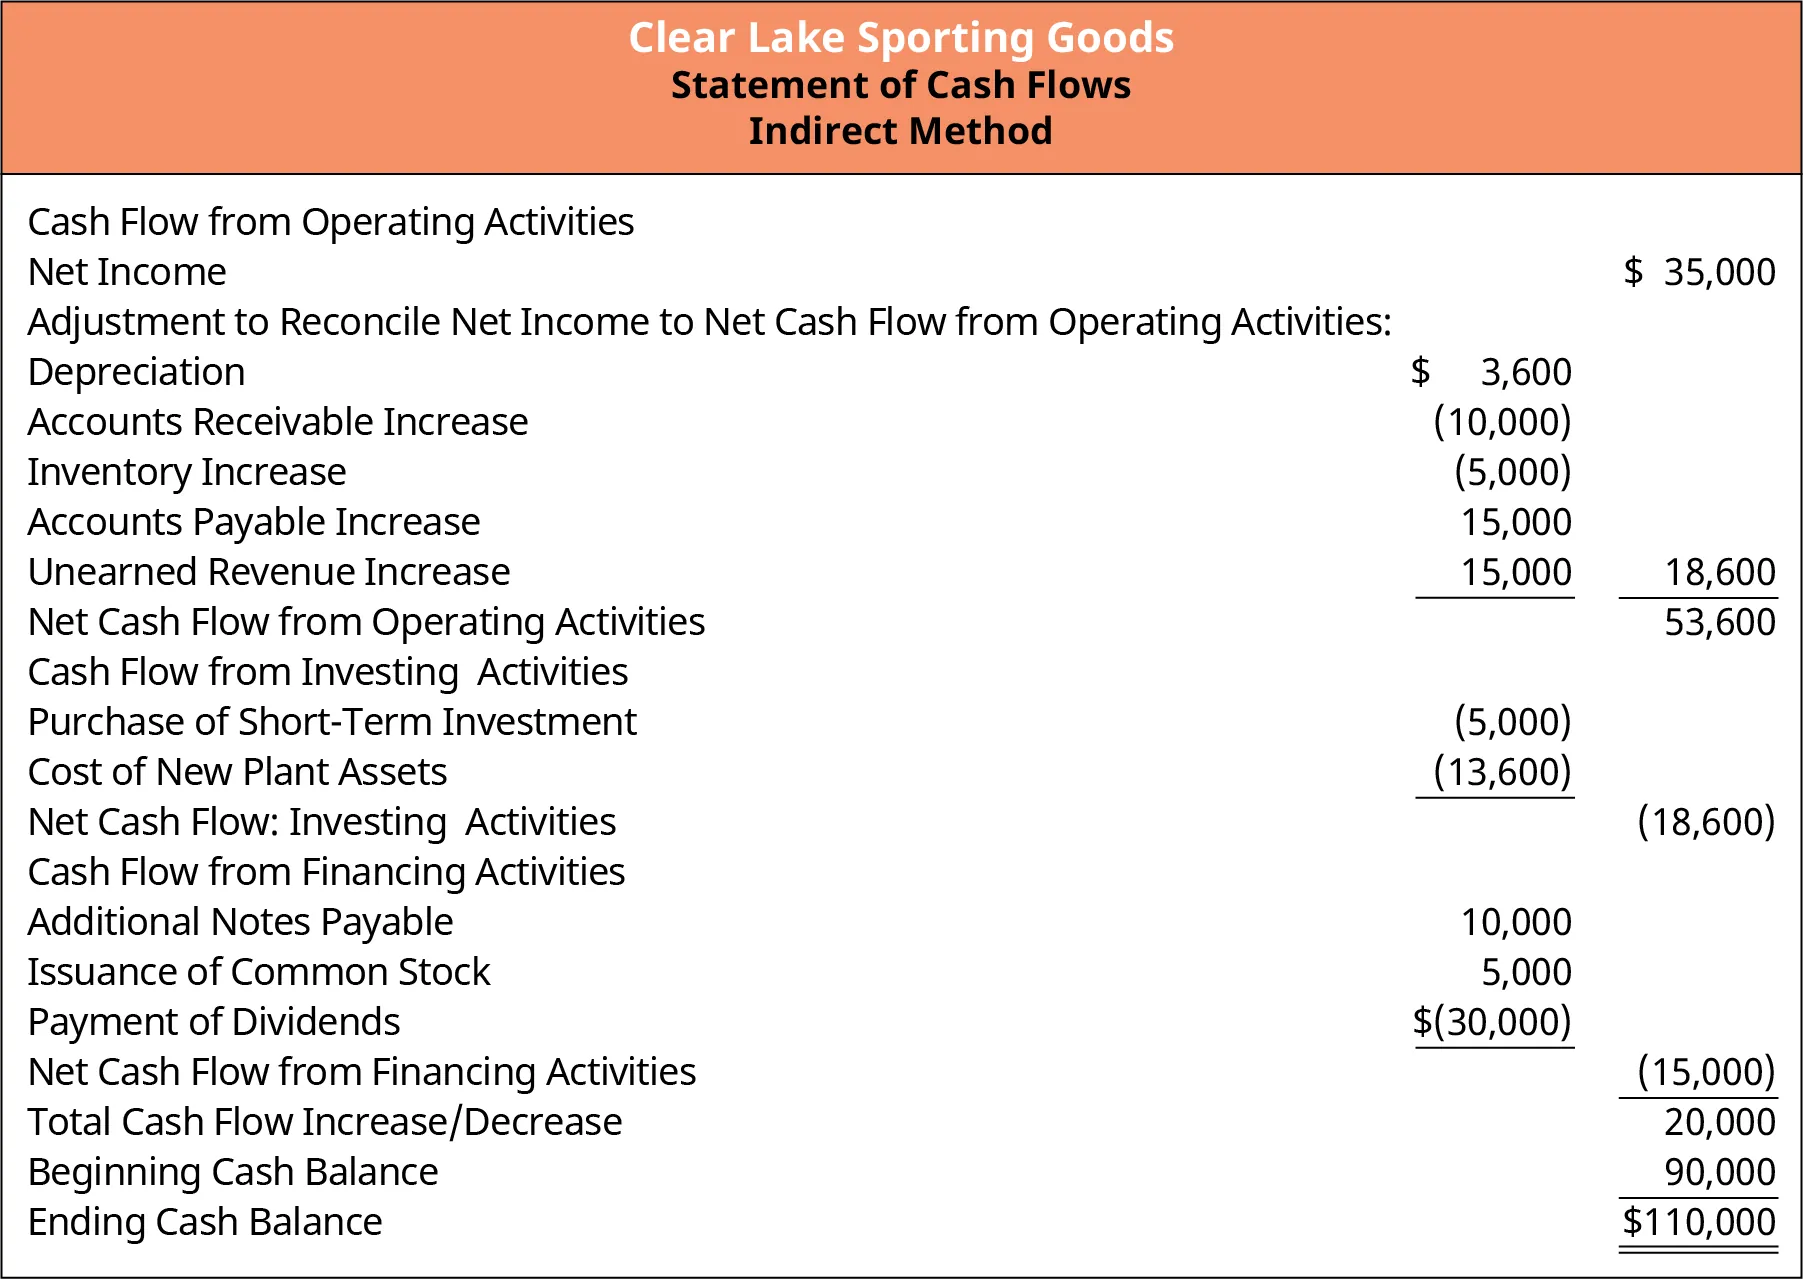 Full Statement of Cash Flows for Clear Lake Sporting Goods. Clear Lake has net cash flow of $20,000. The beginning cash balance was $90,000, making the ending cash balance $110,000.The net cash flow figure was found by calculating the Net Cash Flow from Operating Activities ($53,600) and subtracting the cost of investing activities ($18,600) and the cost of financing activities ($15,000).